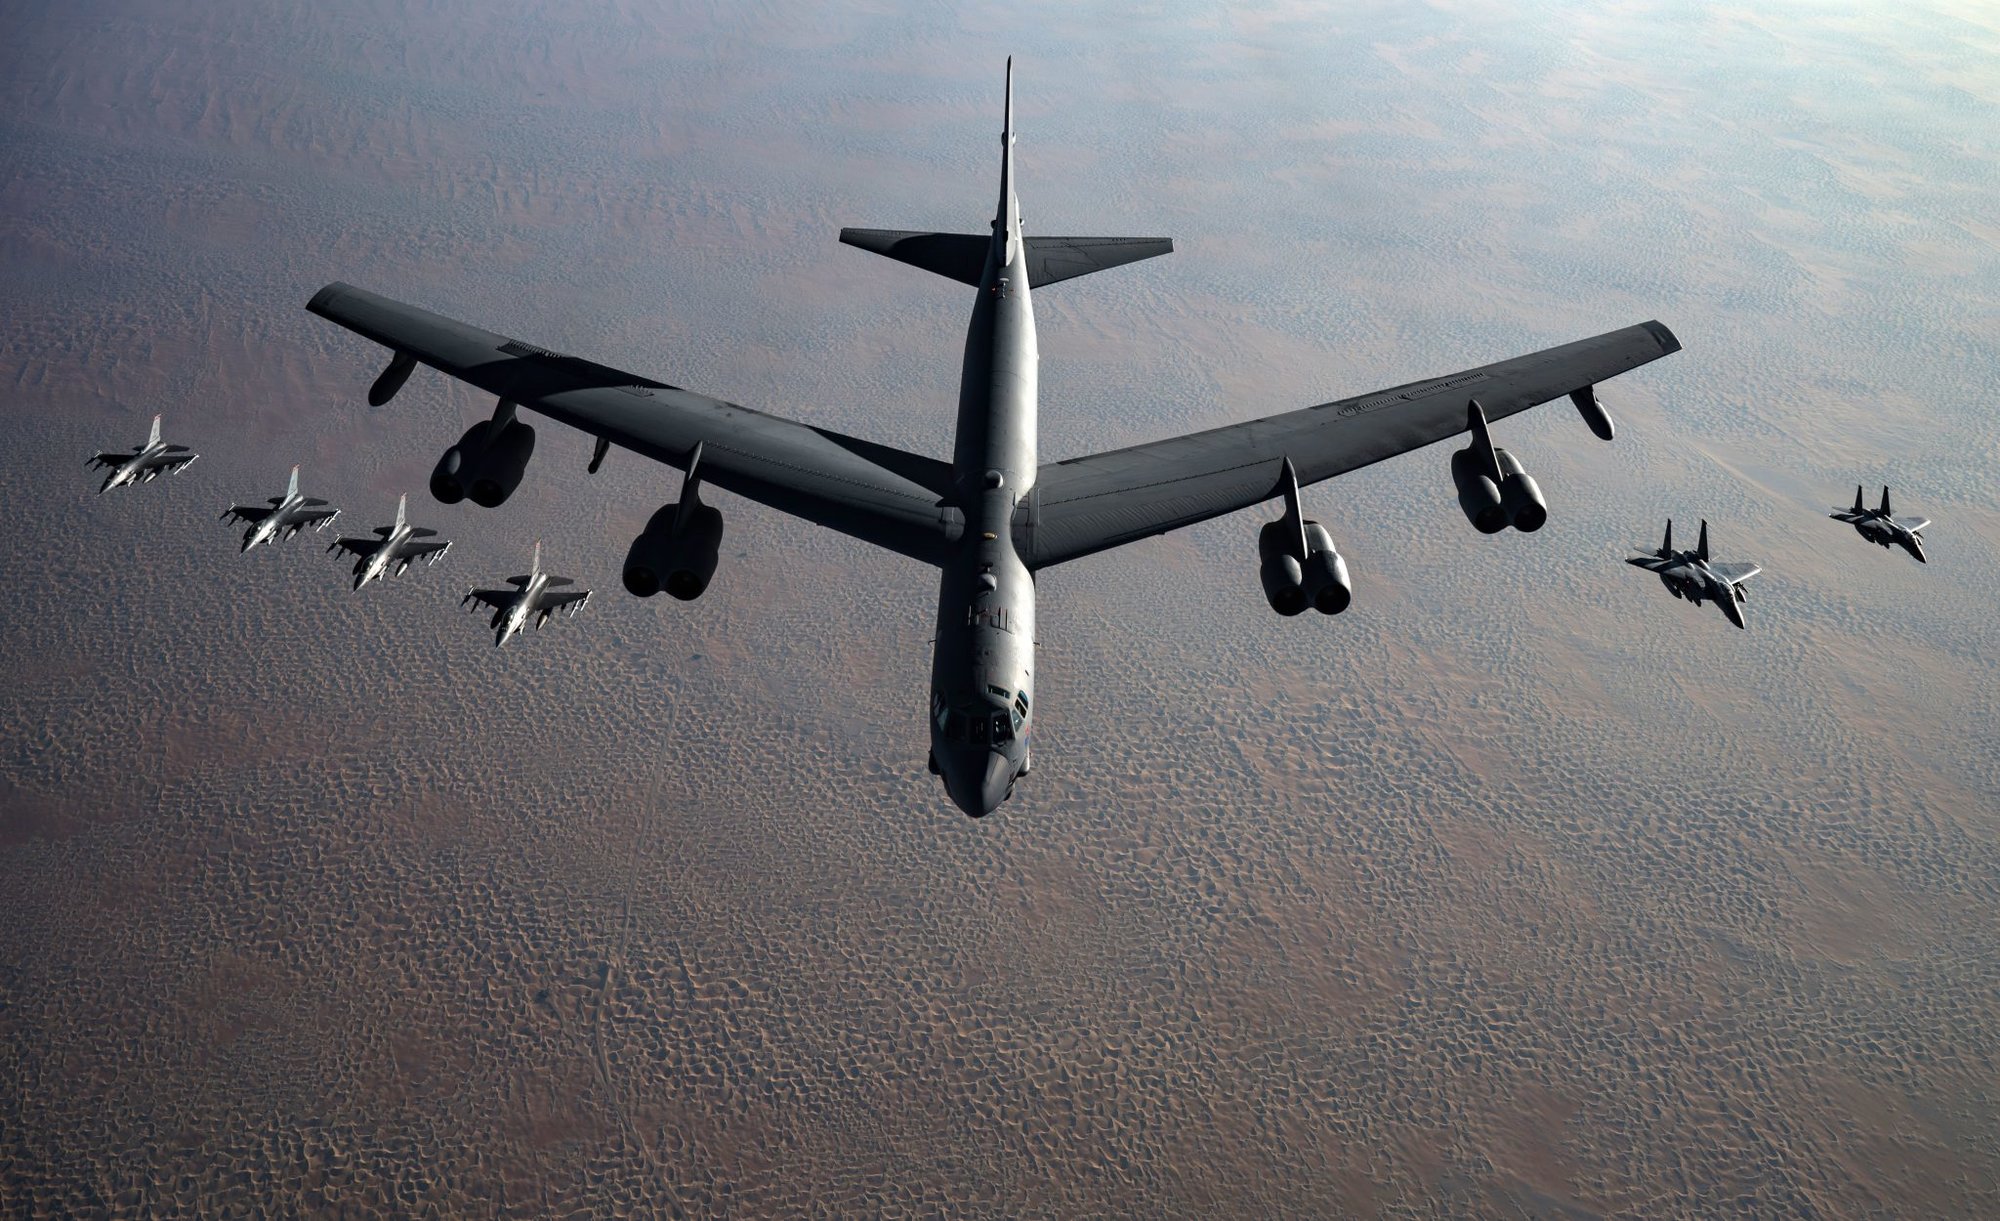 A U.S. Air Force B-52 Stratofortress flies in formation with F-16 Fighting Falcons and F-15E Strike Eagles during a Bomber Task Force mission over the U.S. Central Command area of responsibility Nov. 21, 2020. Bomber Task Force missions help aircrews gain familiarity with the region’s airspace and command and control functions and allow them to integrate with the theater’s U.S. and partner air assets, increasing the combined force’s overall readiness. (U.S. Air Force photo by Staff Sgt. Sean Carnes)